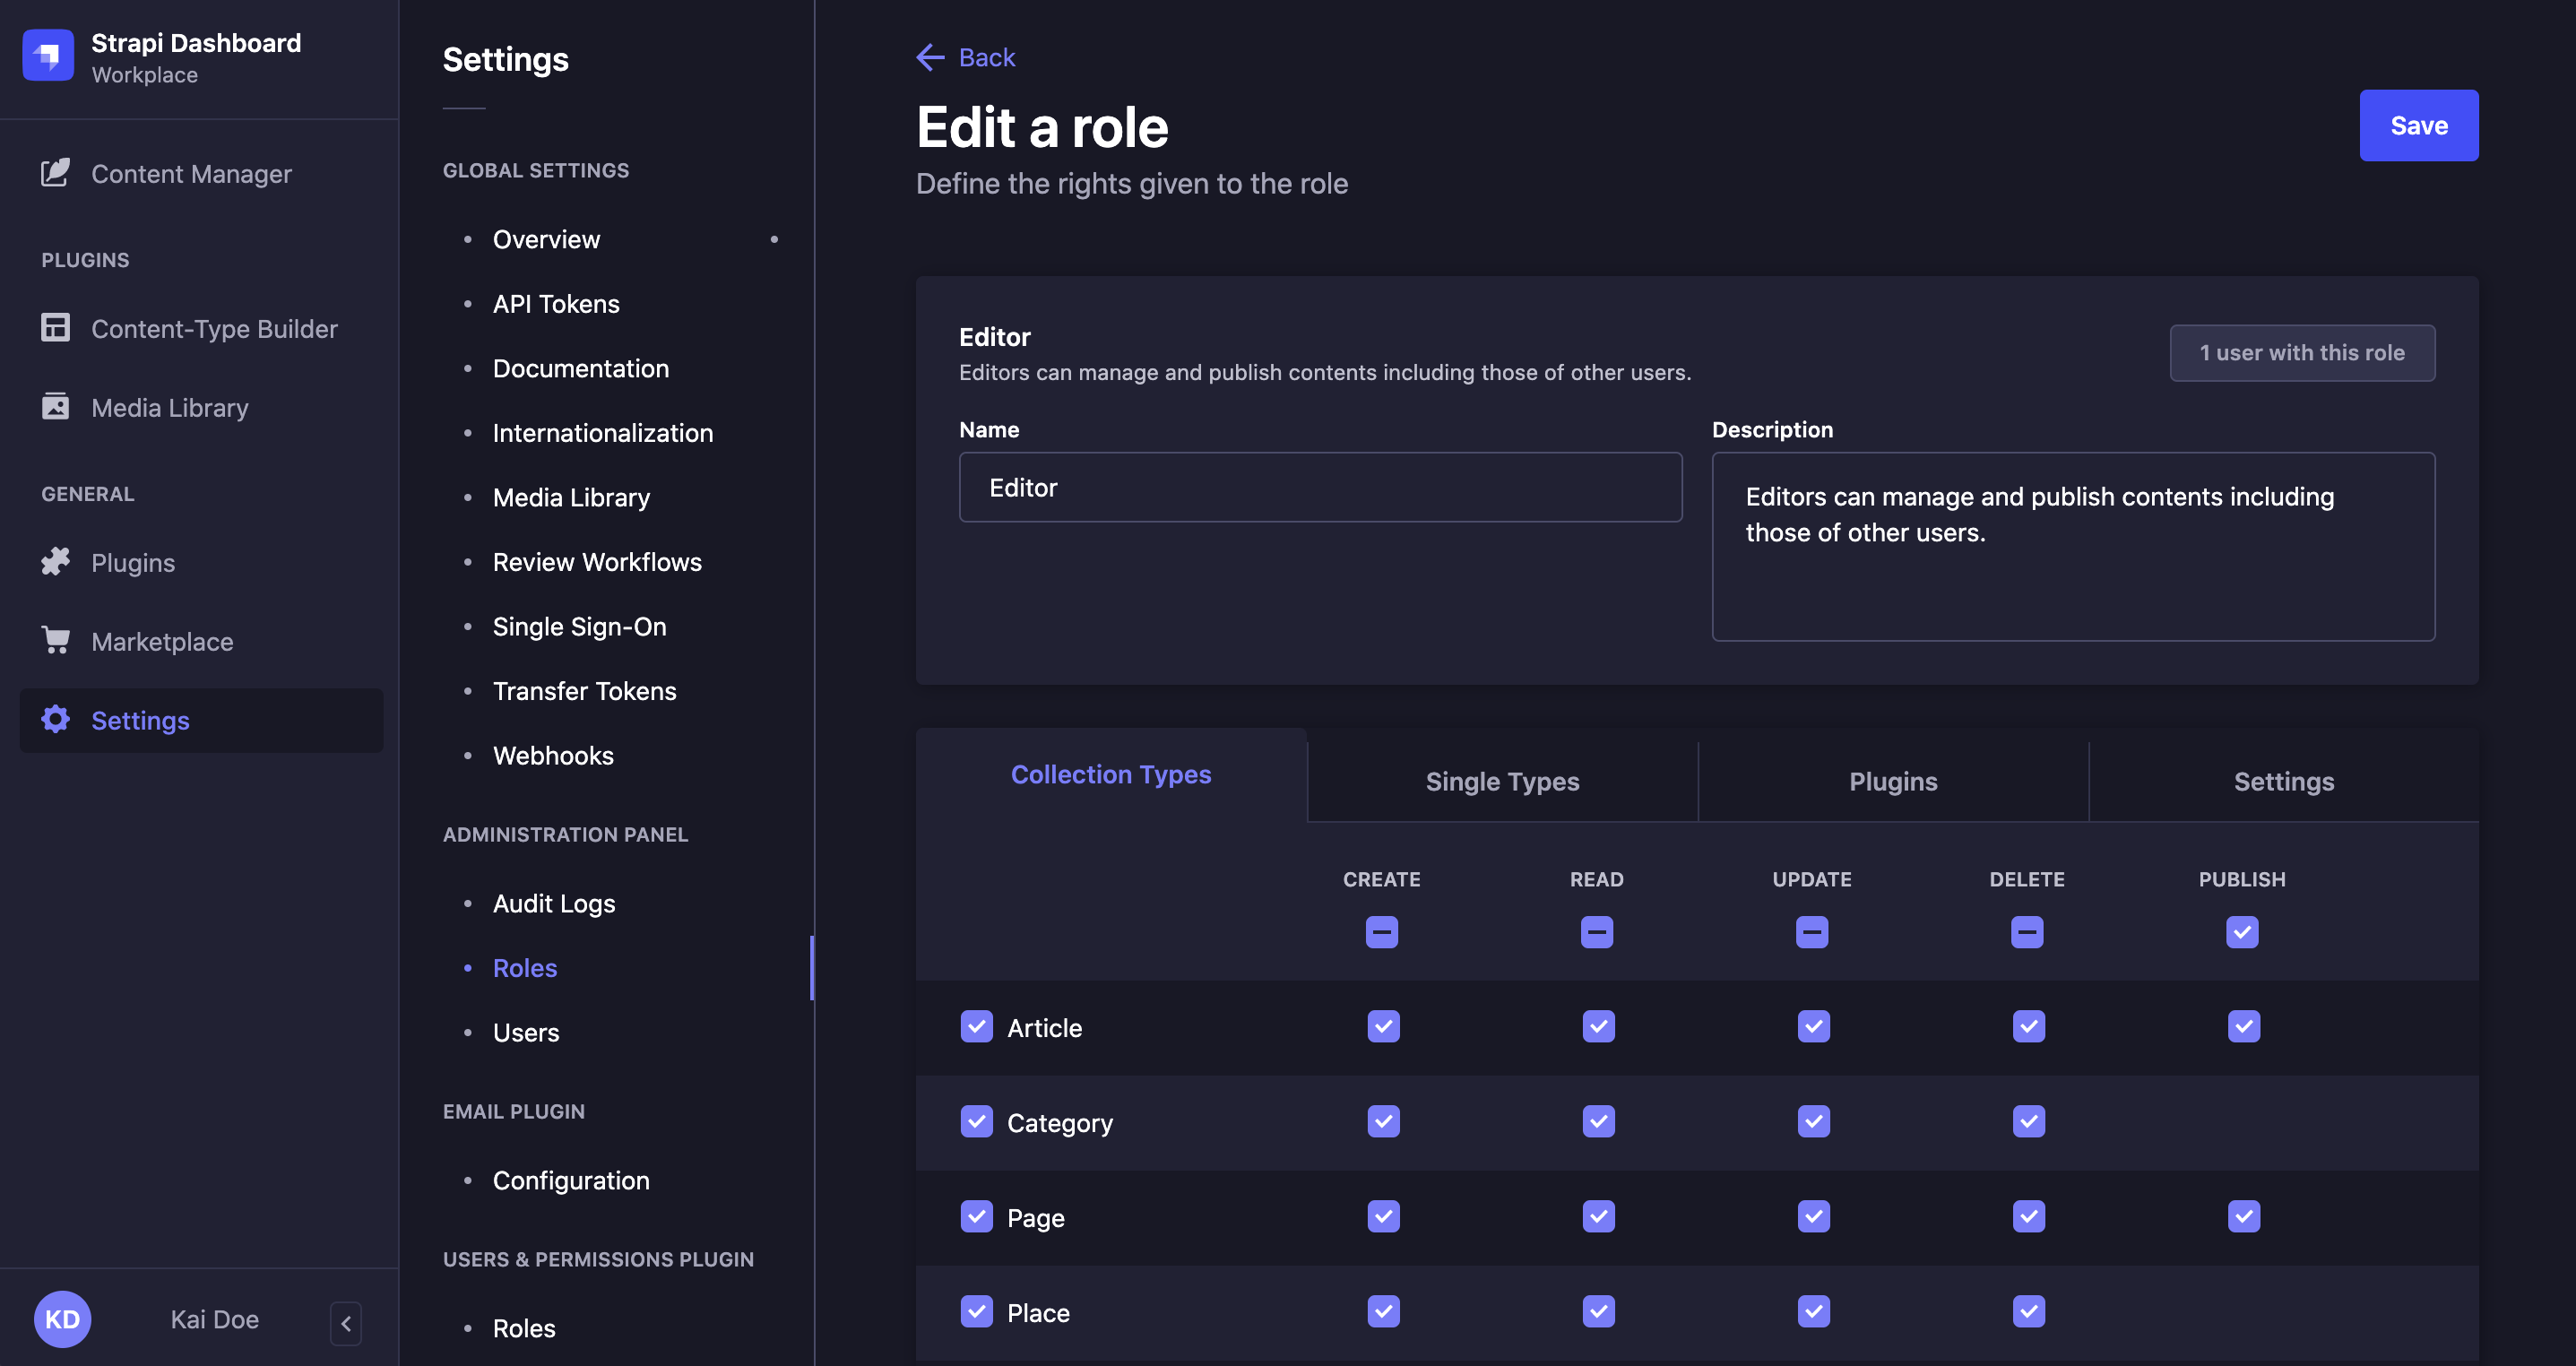 Administrator roles edition interface